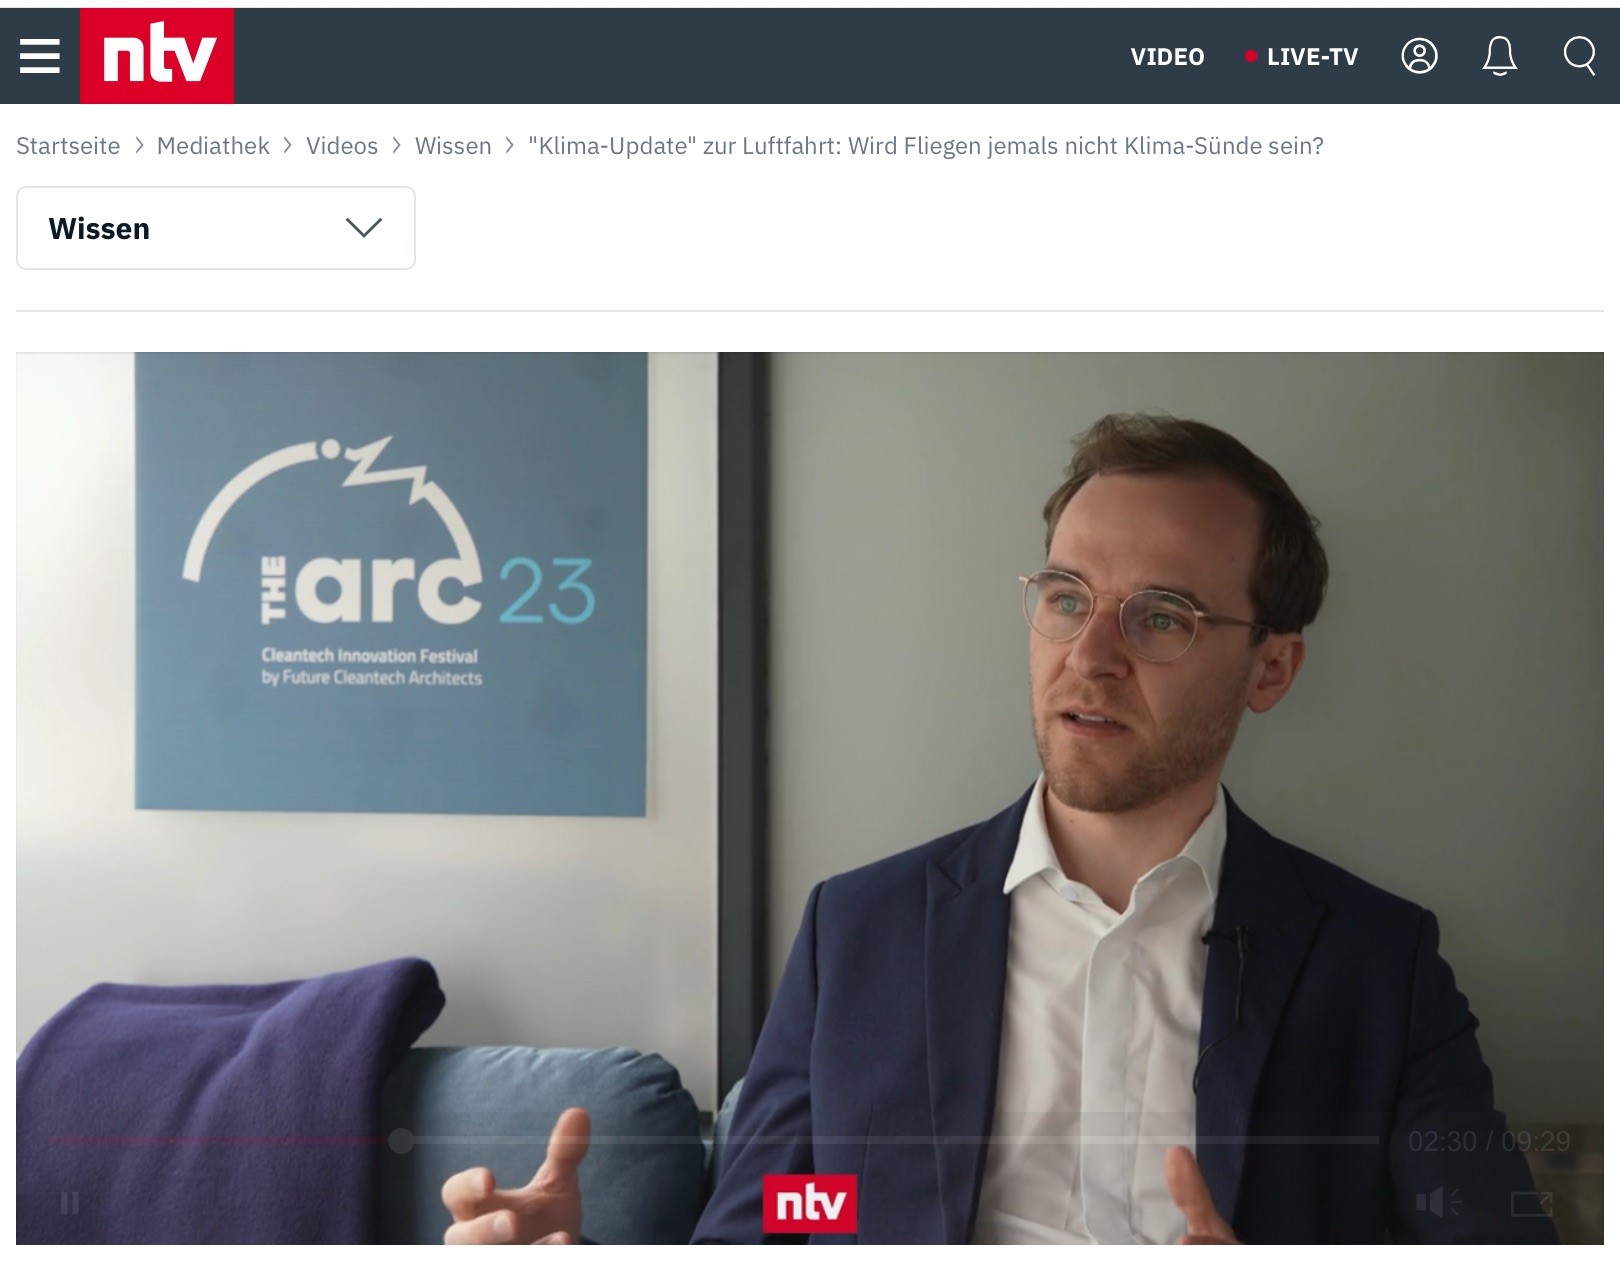 Aviation and The ARC Future Cleantech Festival on TV during prime time